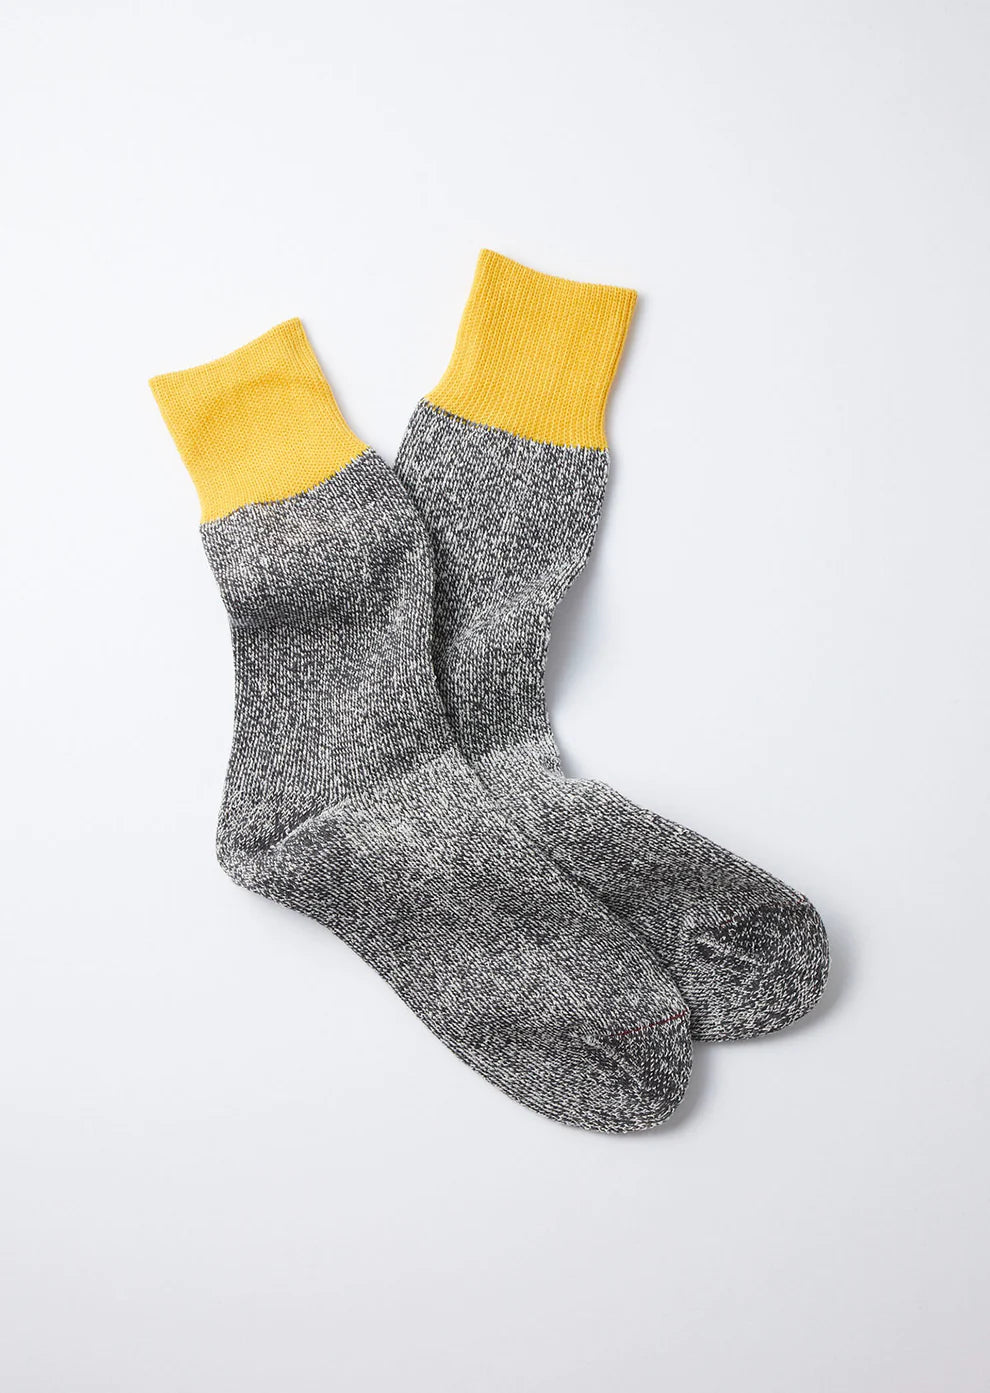 Double Face Crew Socks - Silk & Cotton / Yellow & Charcoal - ROTOTO